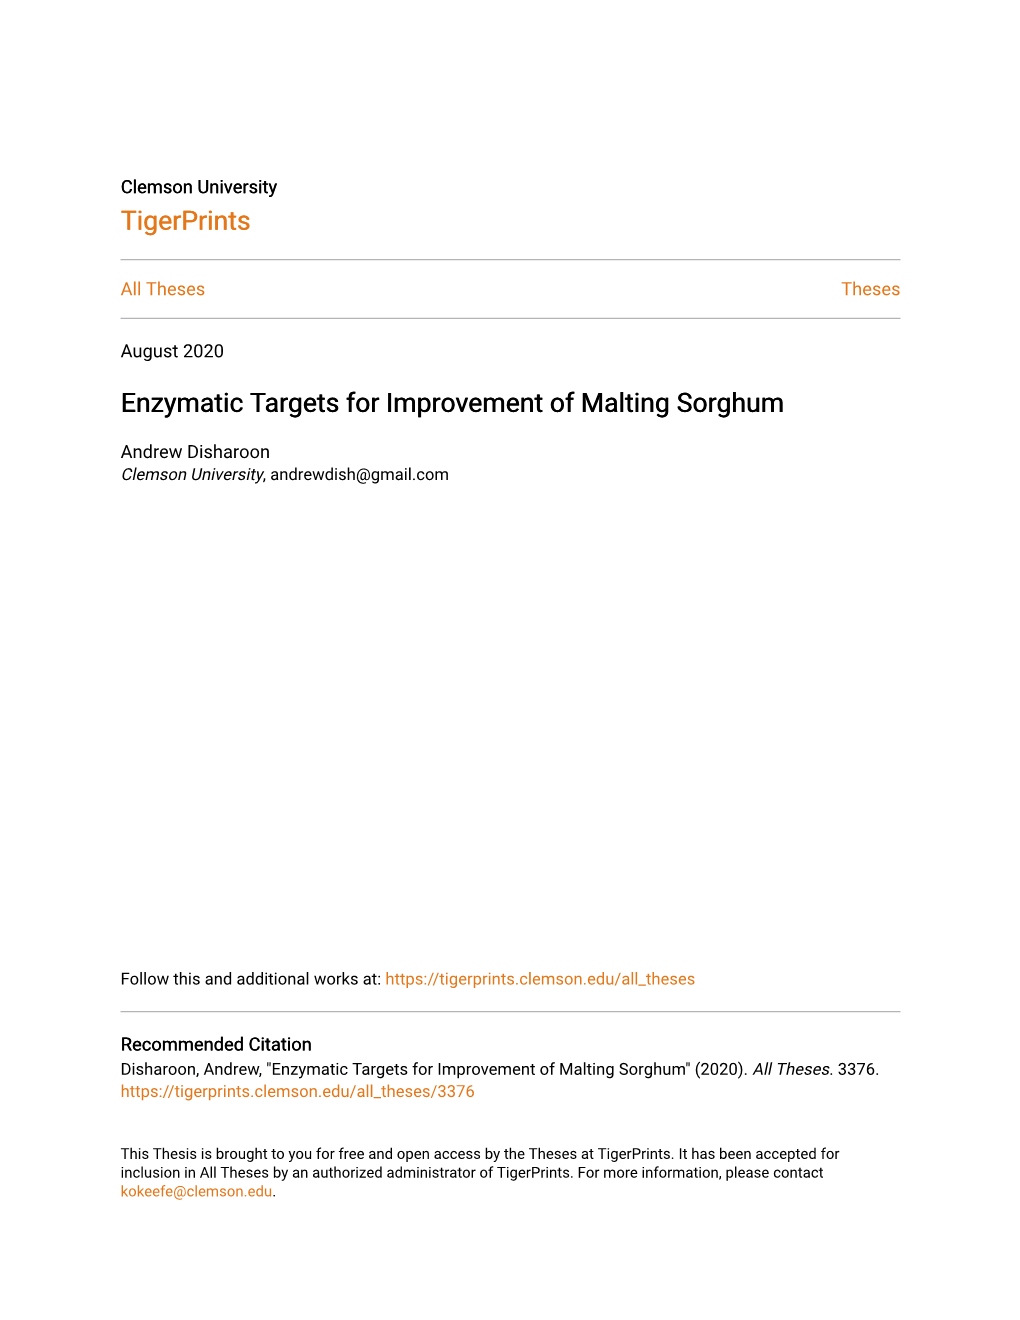 Enzymatic Targets for Improvement of Malting Sorghum